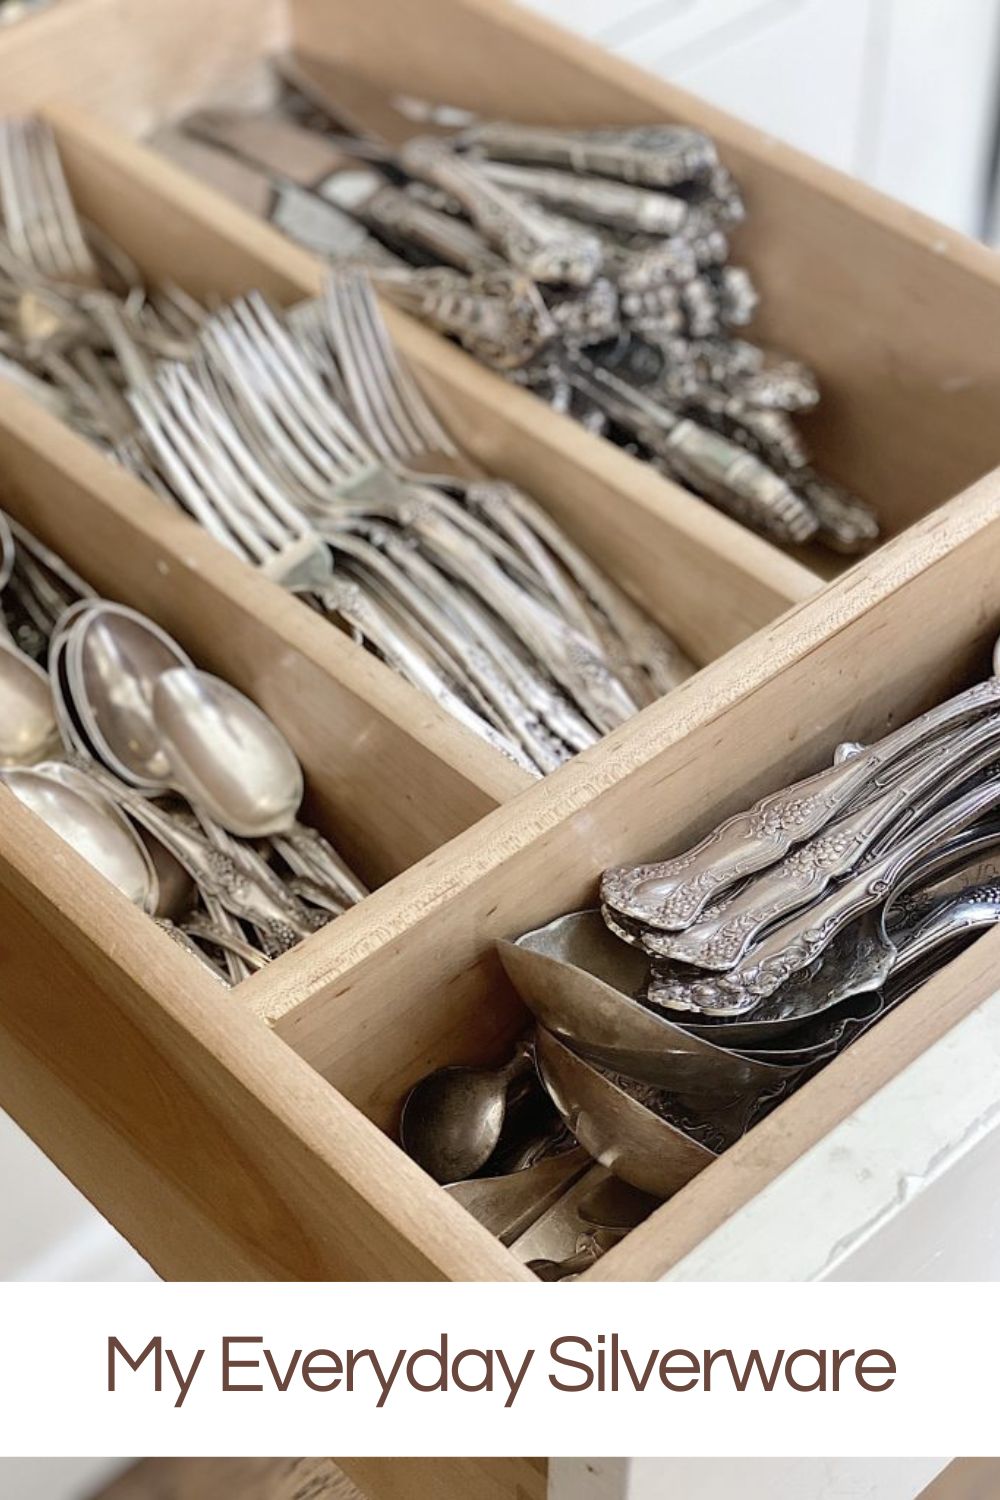 I shocked a lot of people when I mentioned I used my sterling silver flatware every day. But that wasn't the most shocking part.